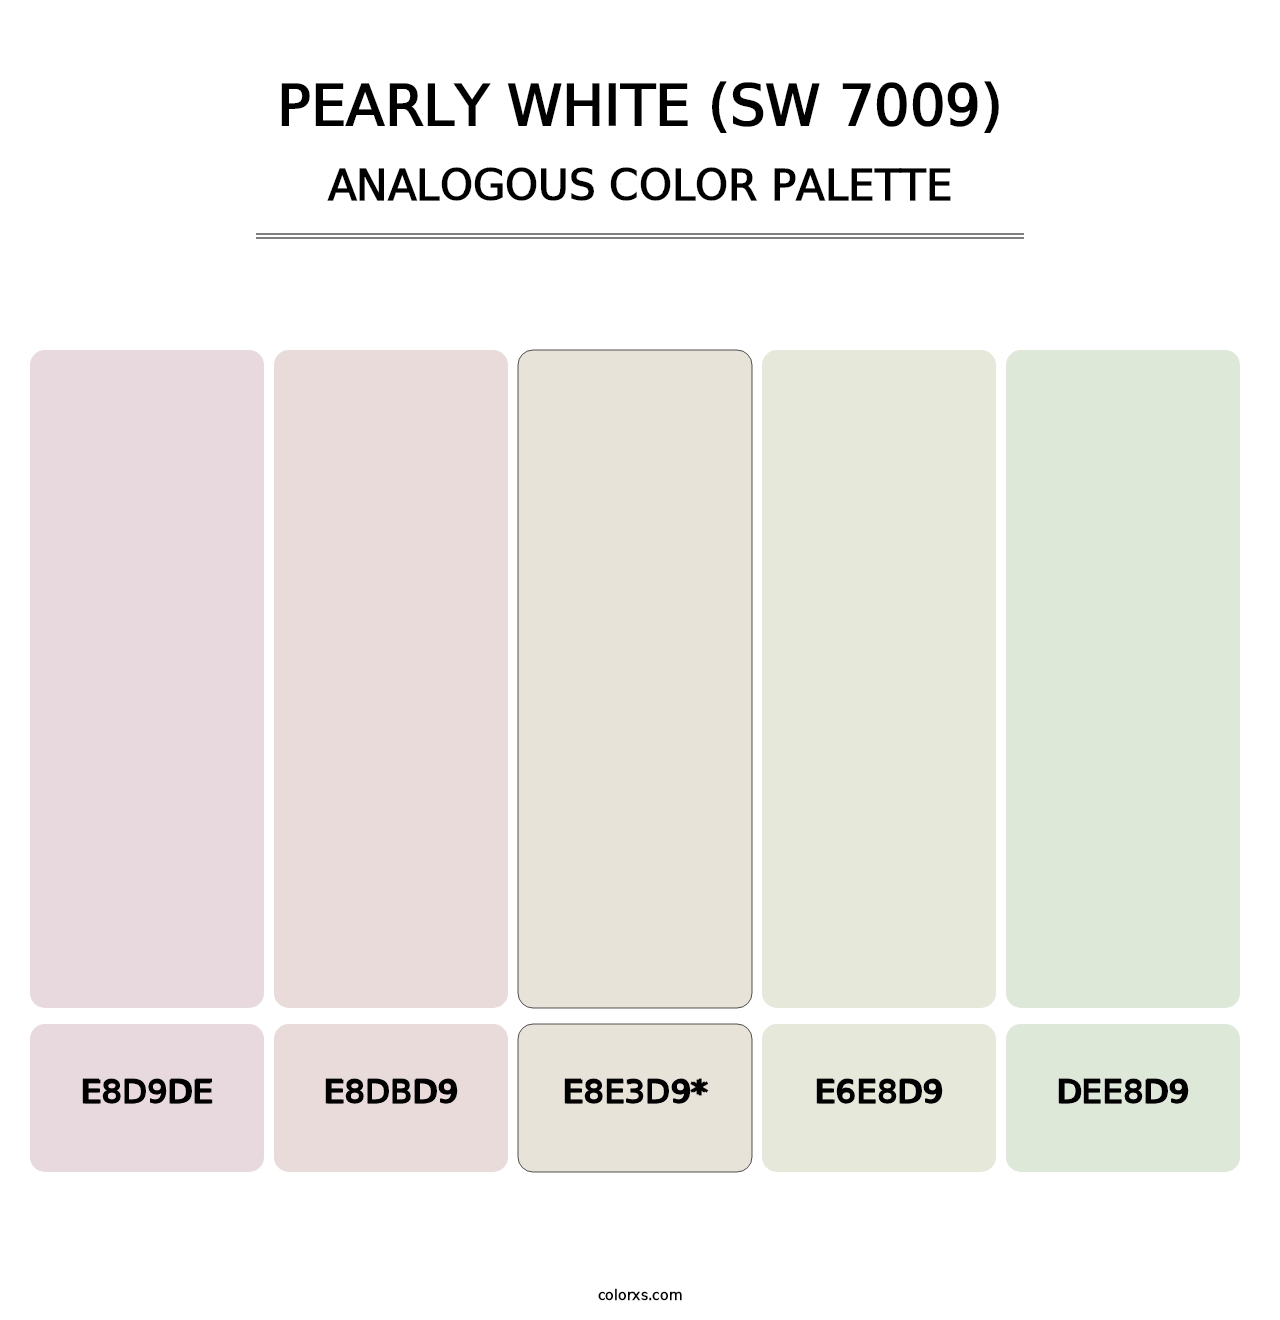 Pearly White (SW 7009) - Analogous Color Palette